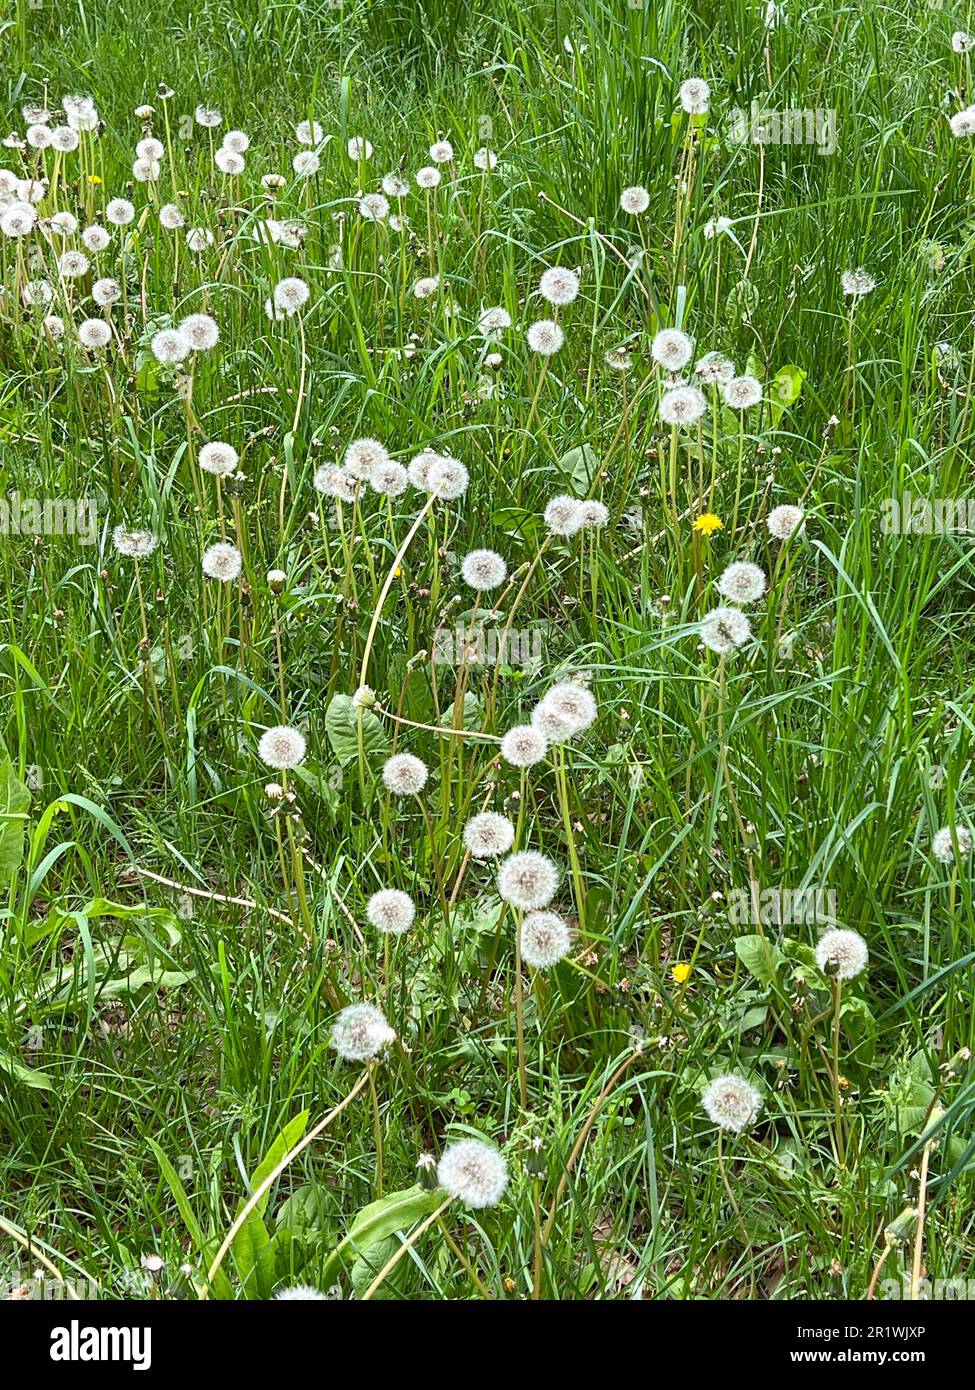 Field full of wishes. Dendelions gone to seed. Ready to blow and make wishes. Stock Photo